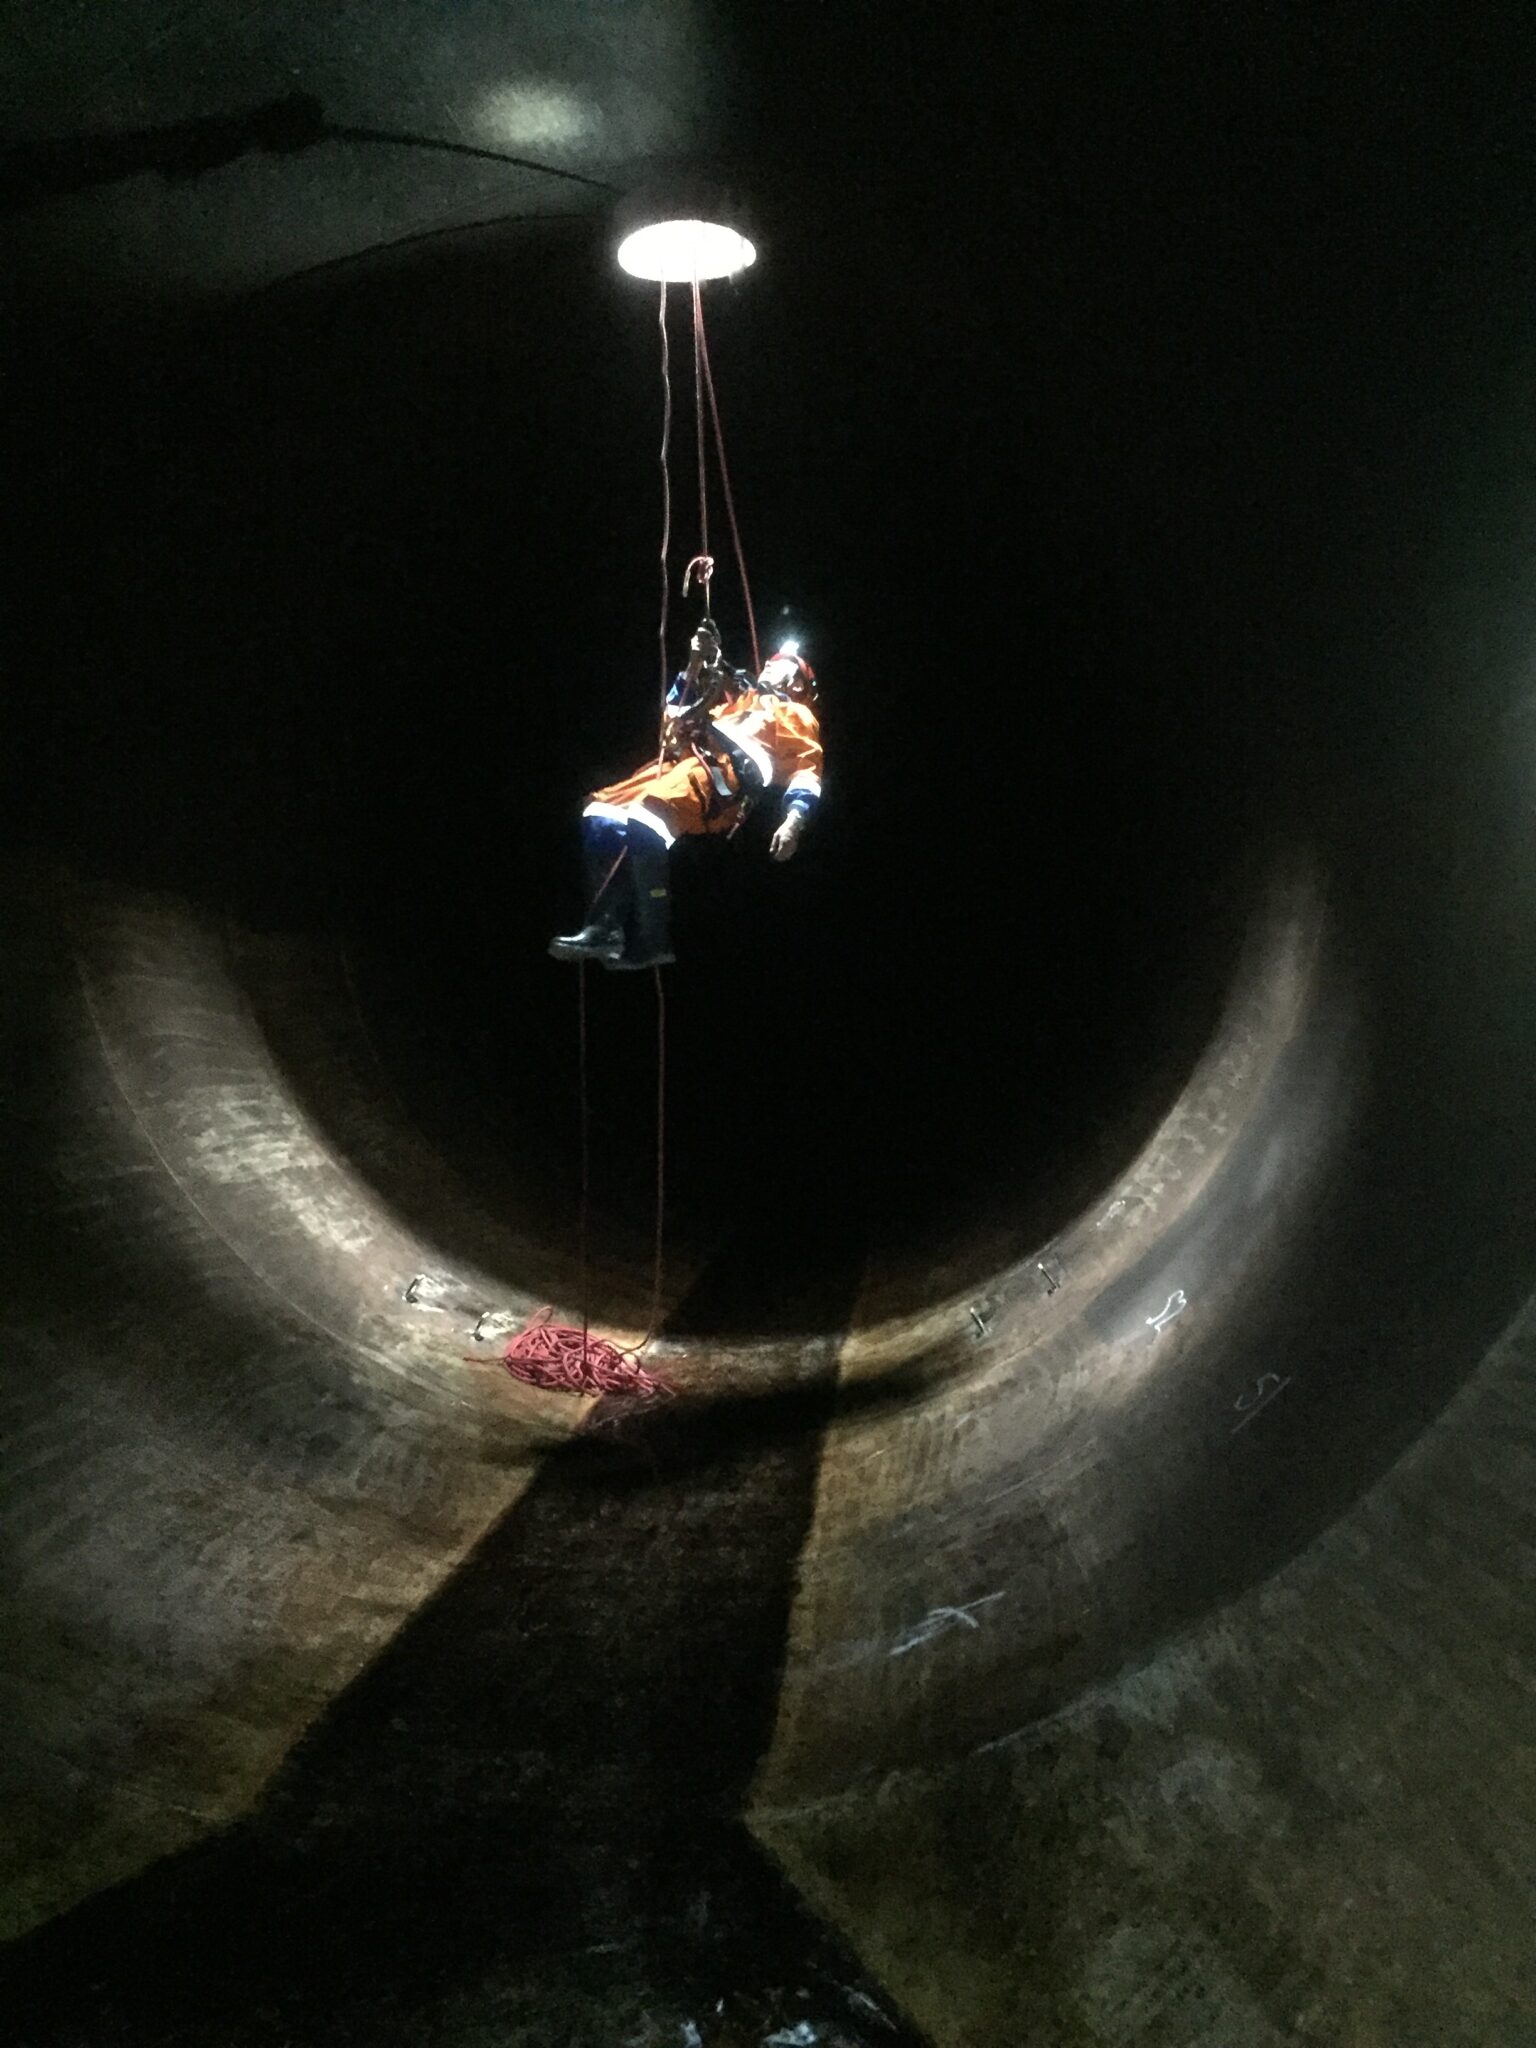 Accessing a penstock to carry out laser scanning for corrosion mapping